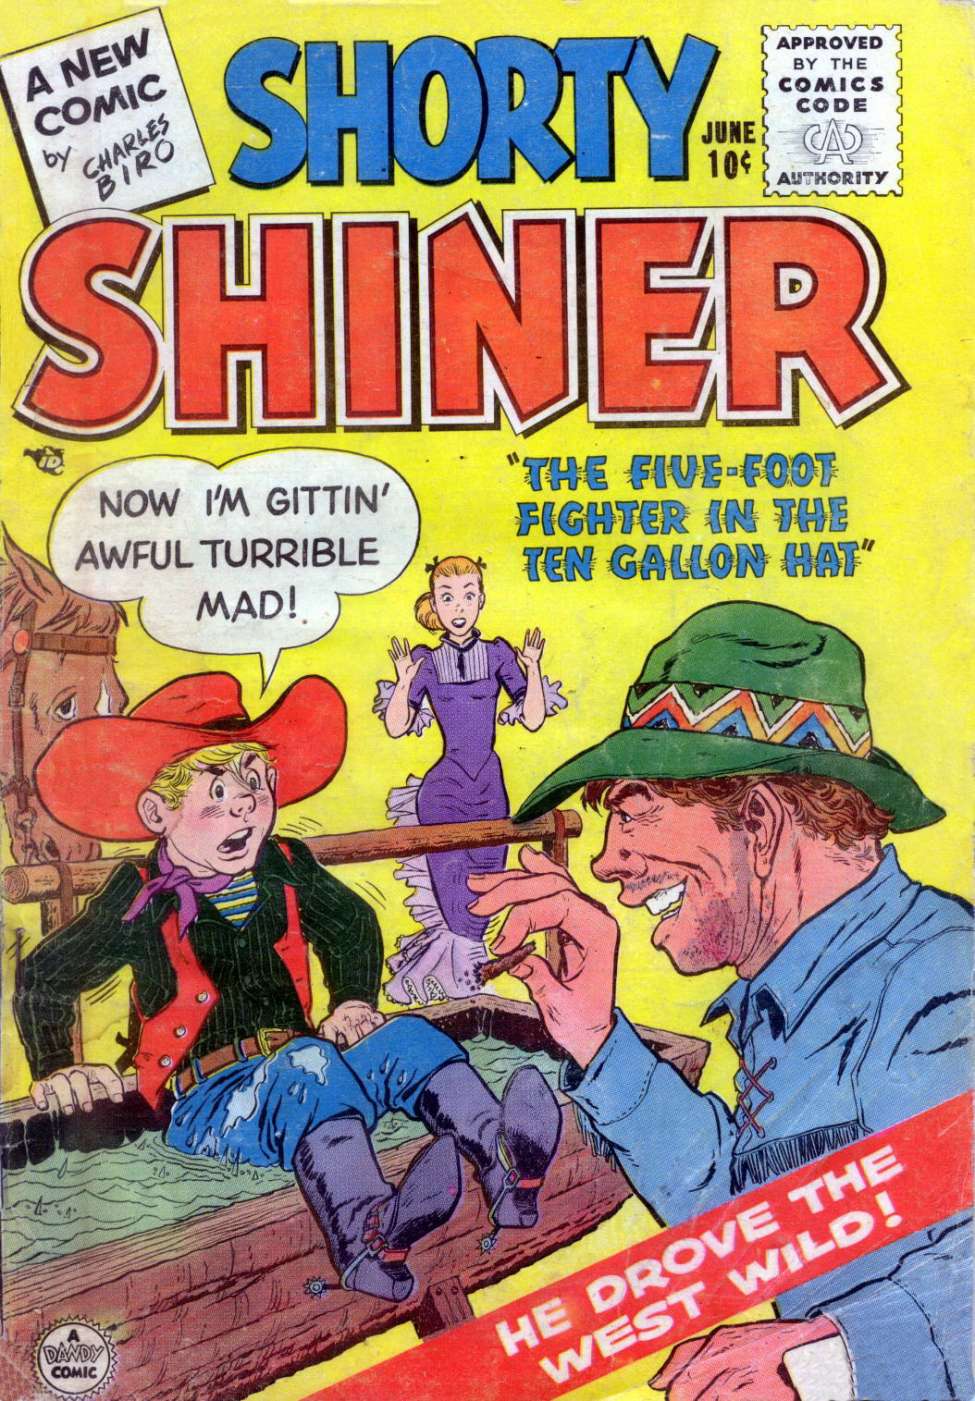 Book Cover For Shorty Shiner 1